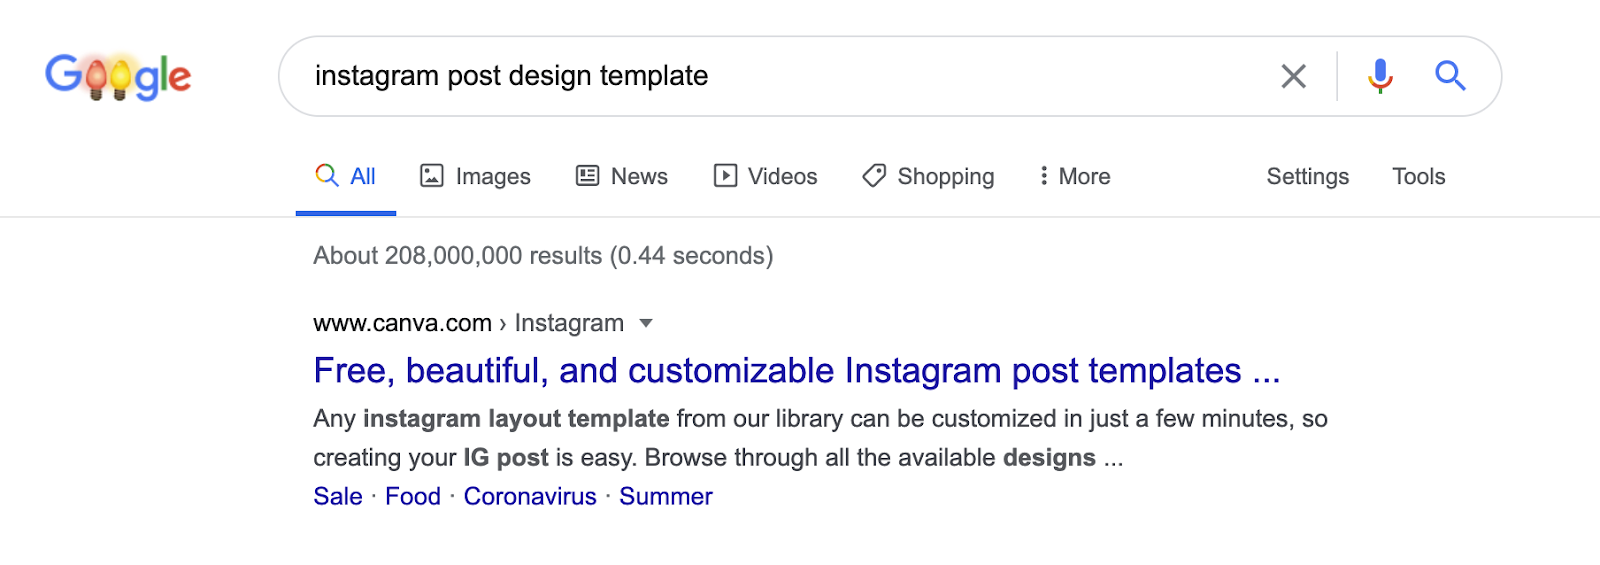 An image of a Google search of Instagram post design template